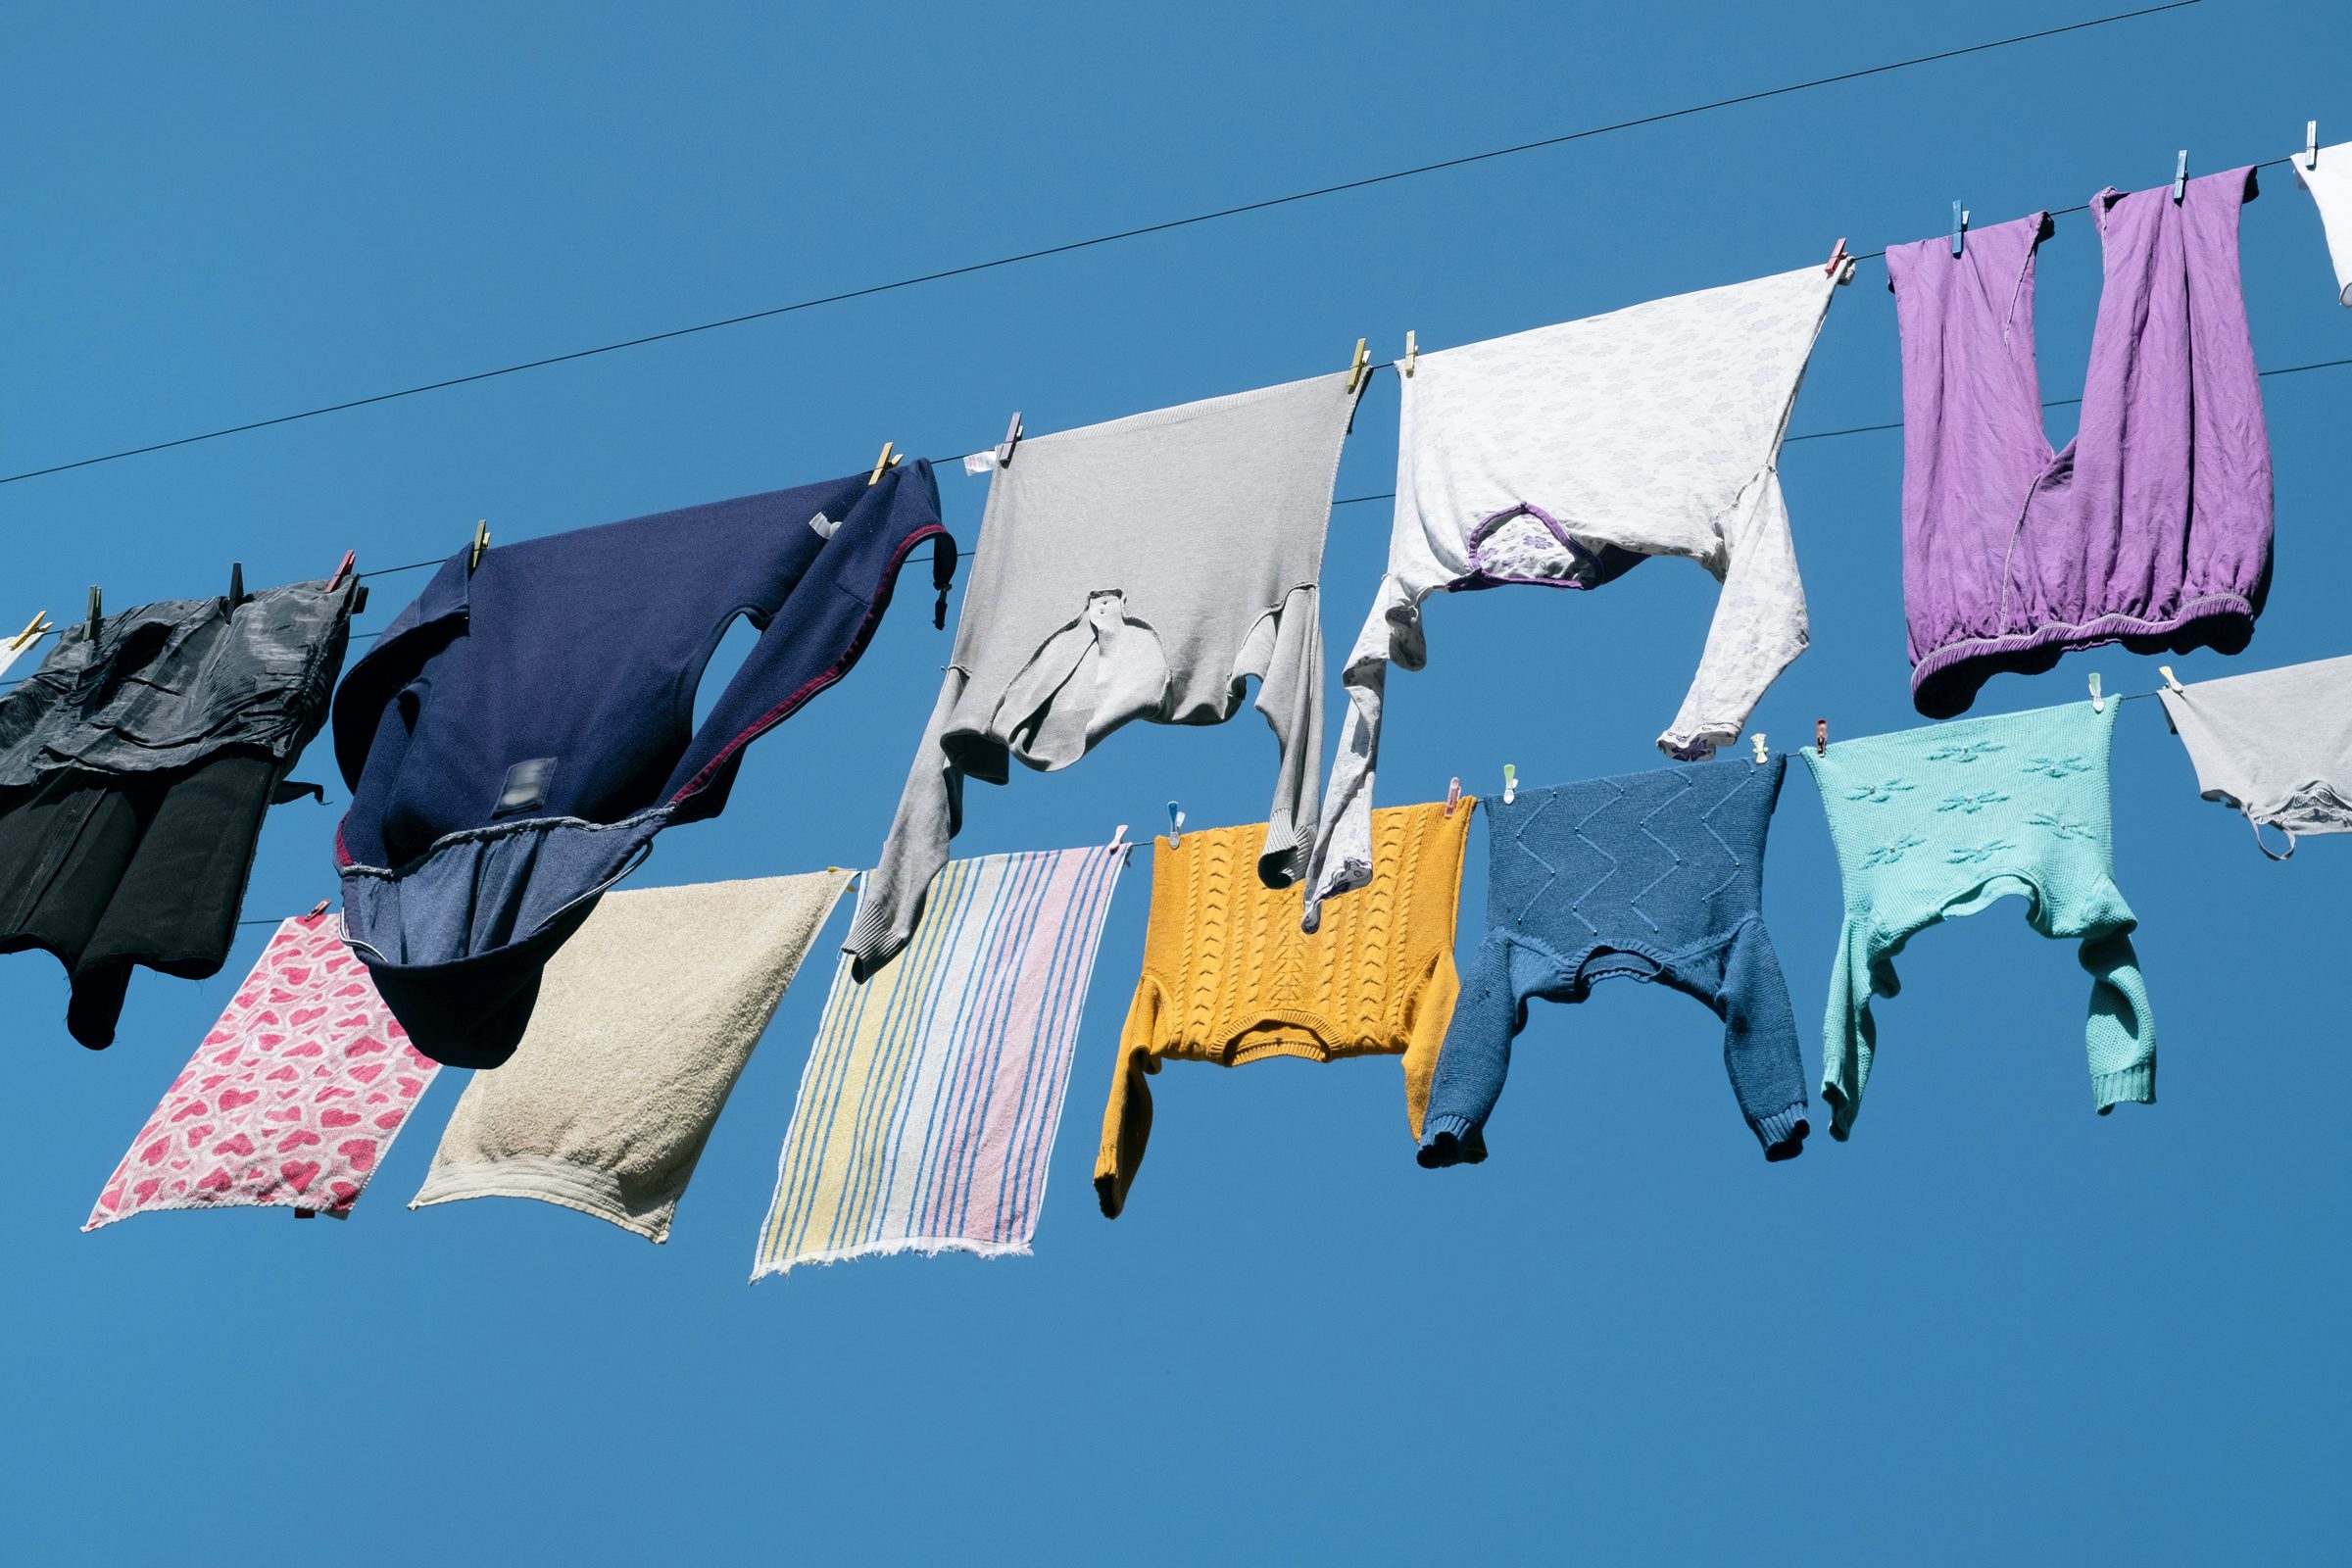 Clothes Line with clothes drying against the blue sky